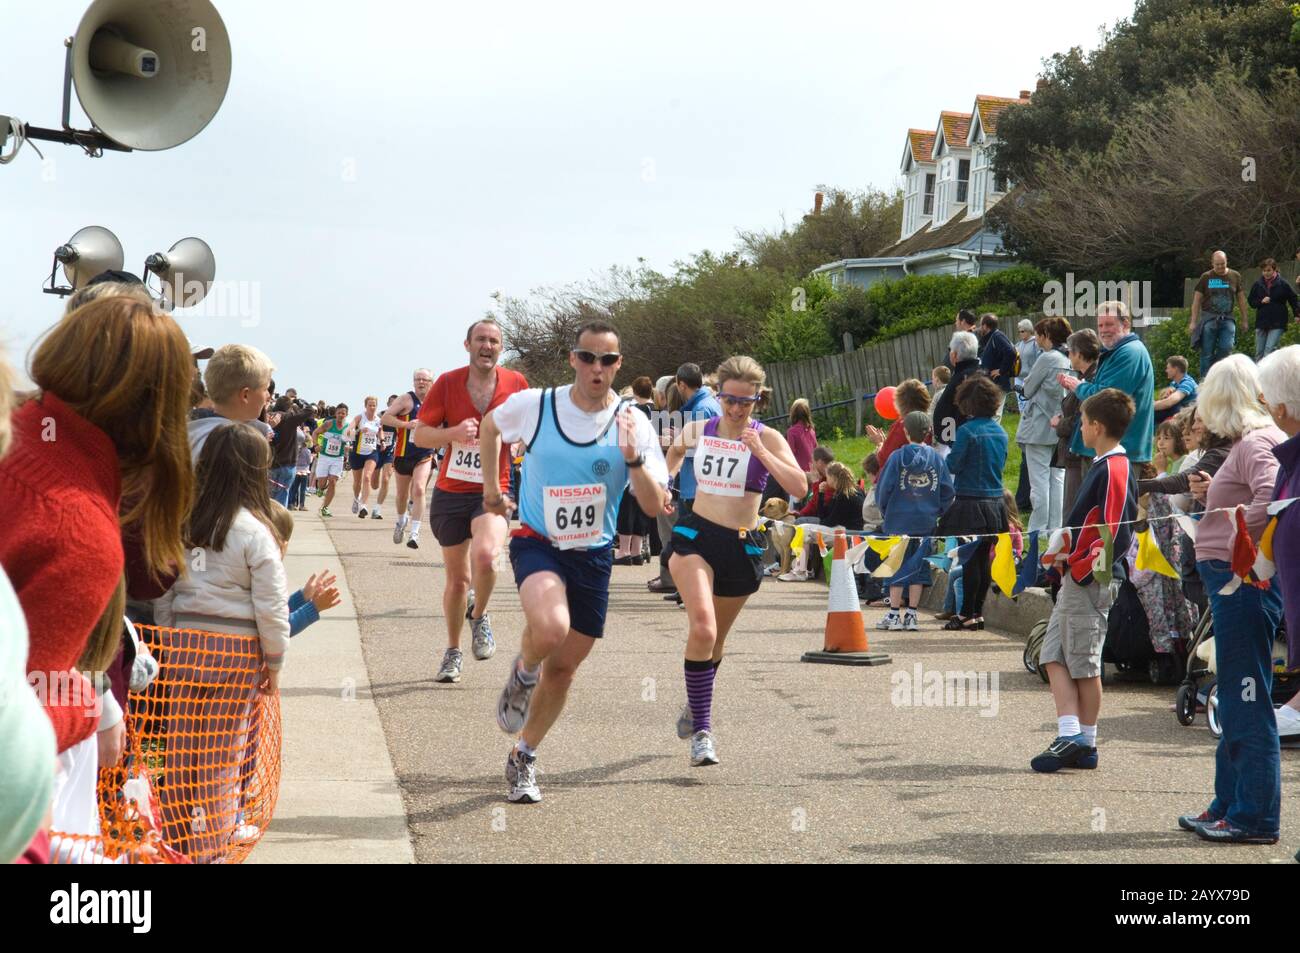 Runners and spectators at a 10KM charity run. Male an female runners in the centre race to the finish line. Stock Photo